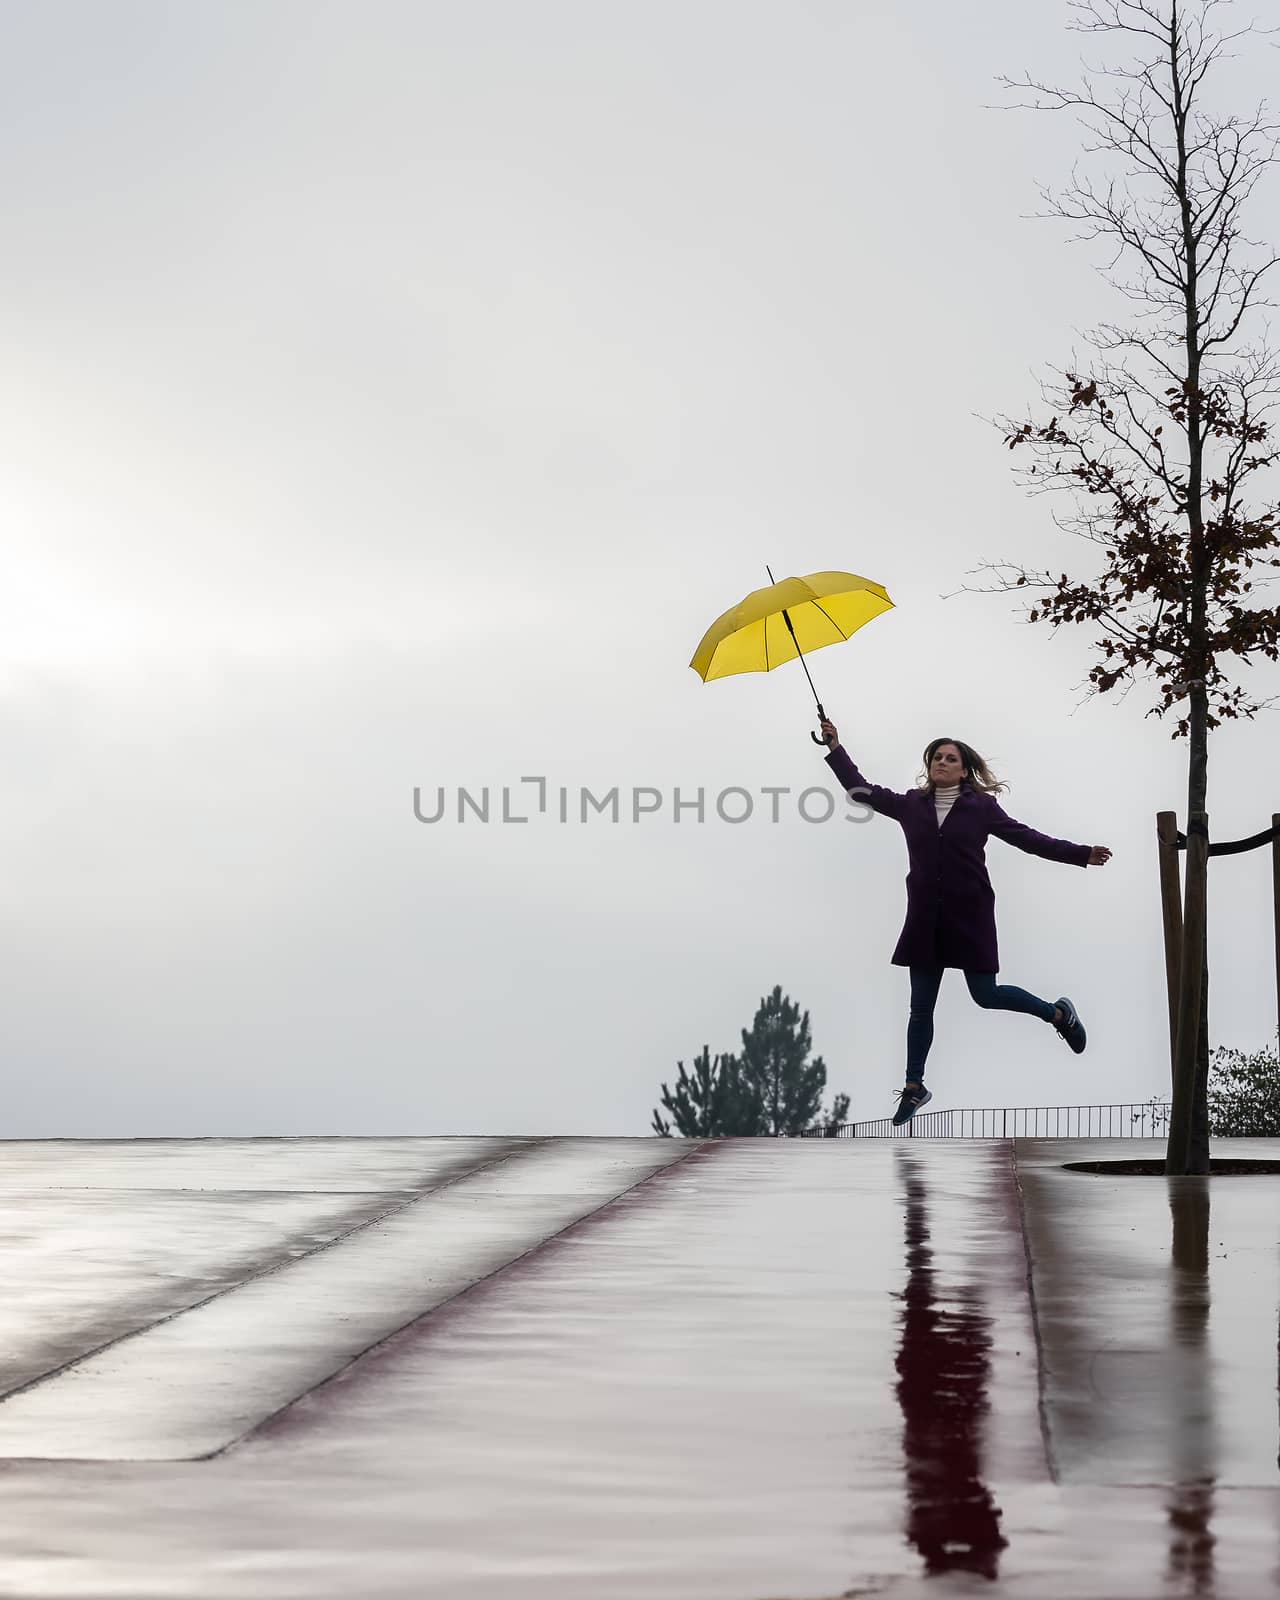 Woman jumping on the horizon with a yellow umbrella on a rainy day. Space for your text.